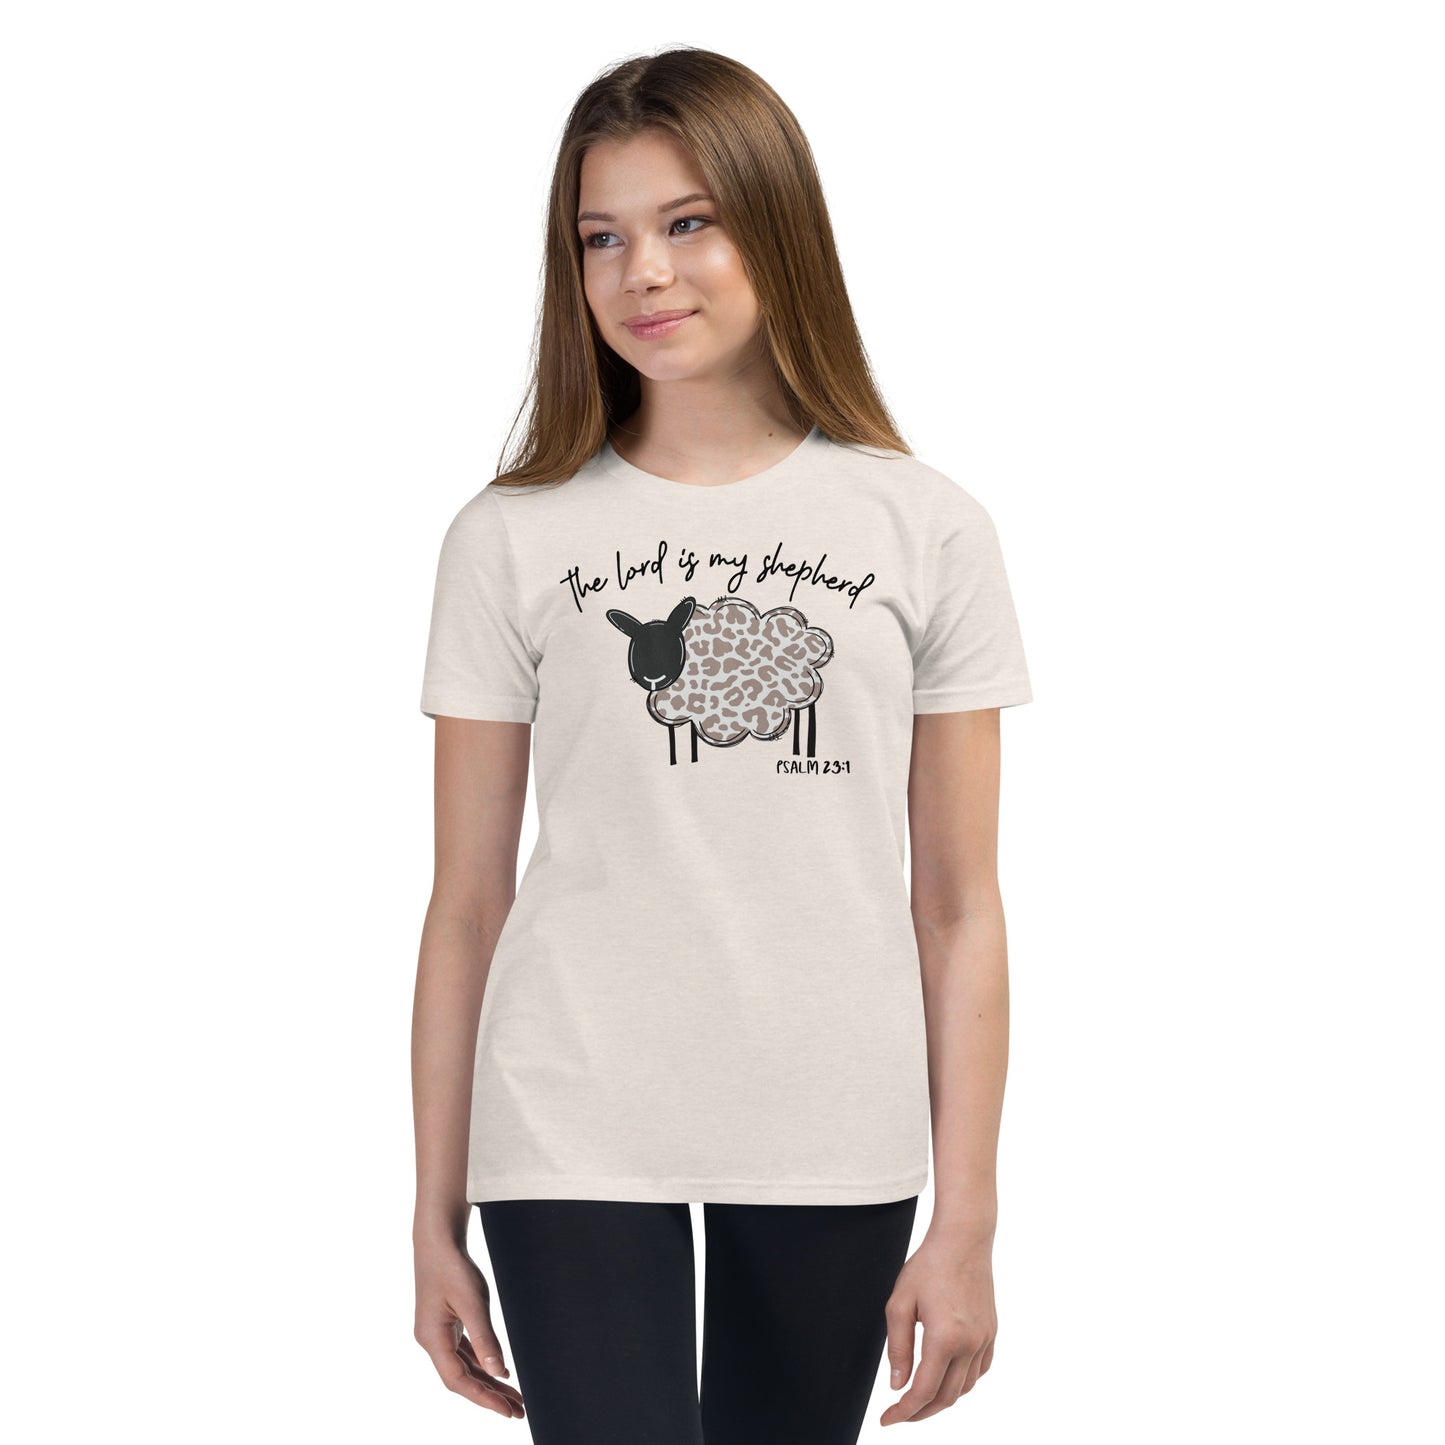 Youth Short Sleeve T-Shirt - The Lord is My Shepherd Psalms 25:1